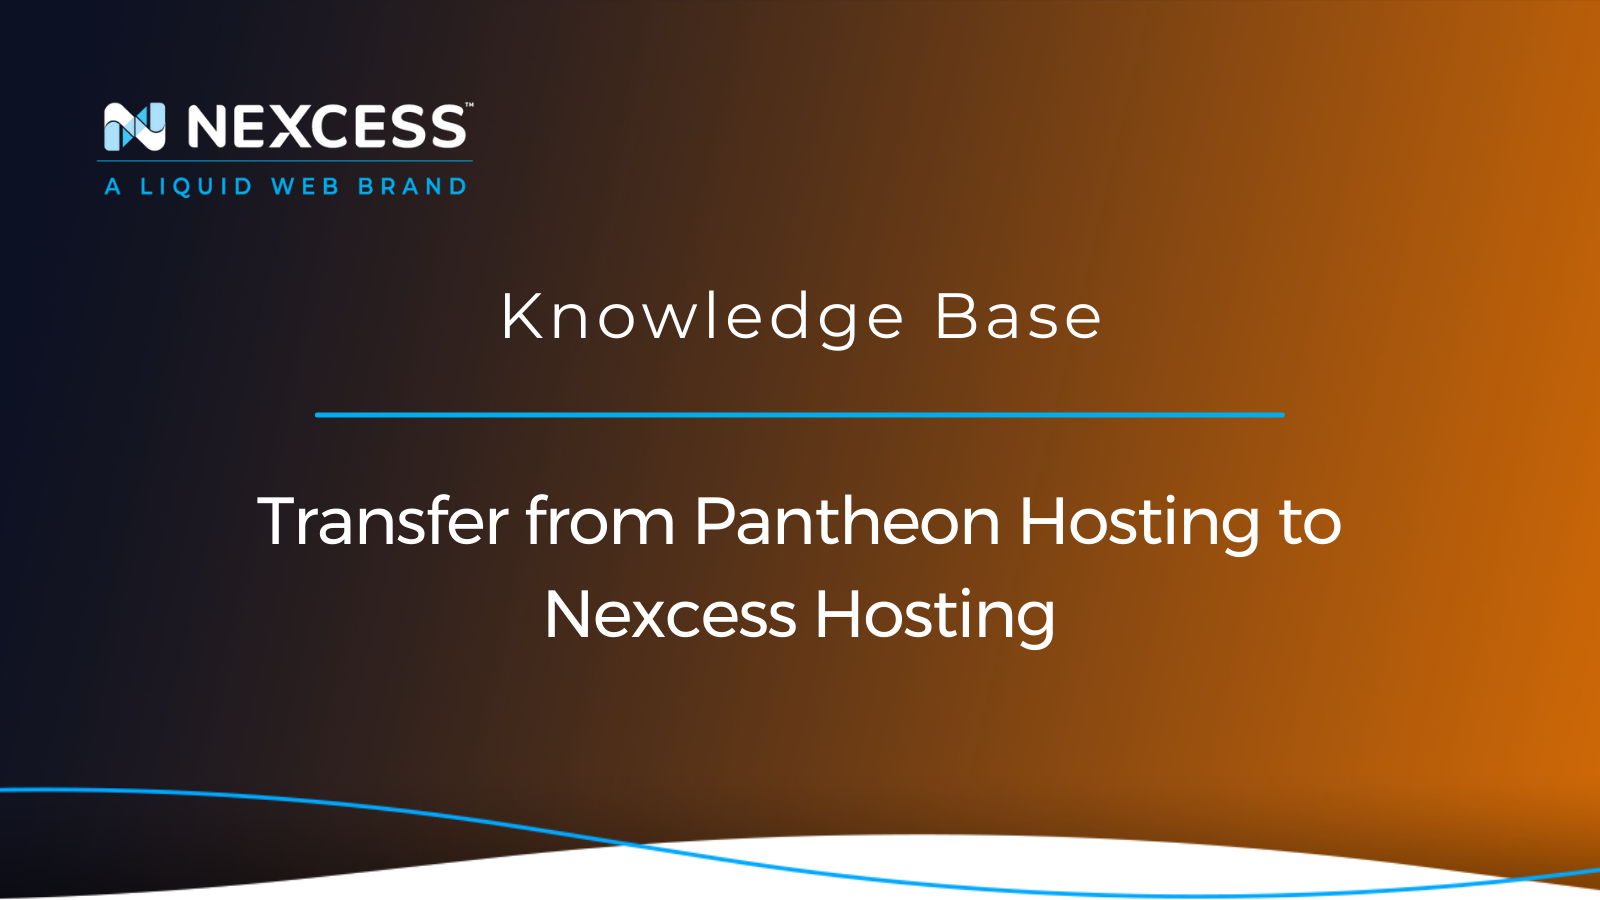 Transfer from Pantheon Hosting to Nexcess Hosting